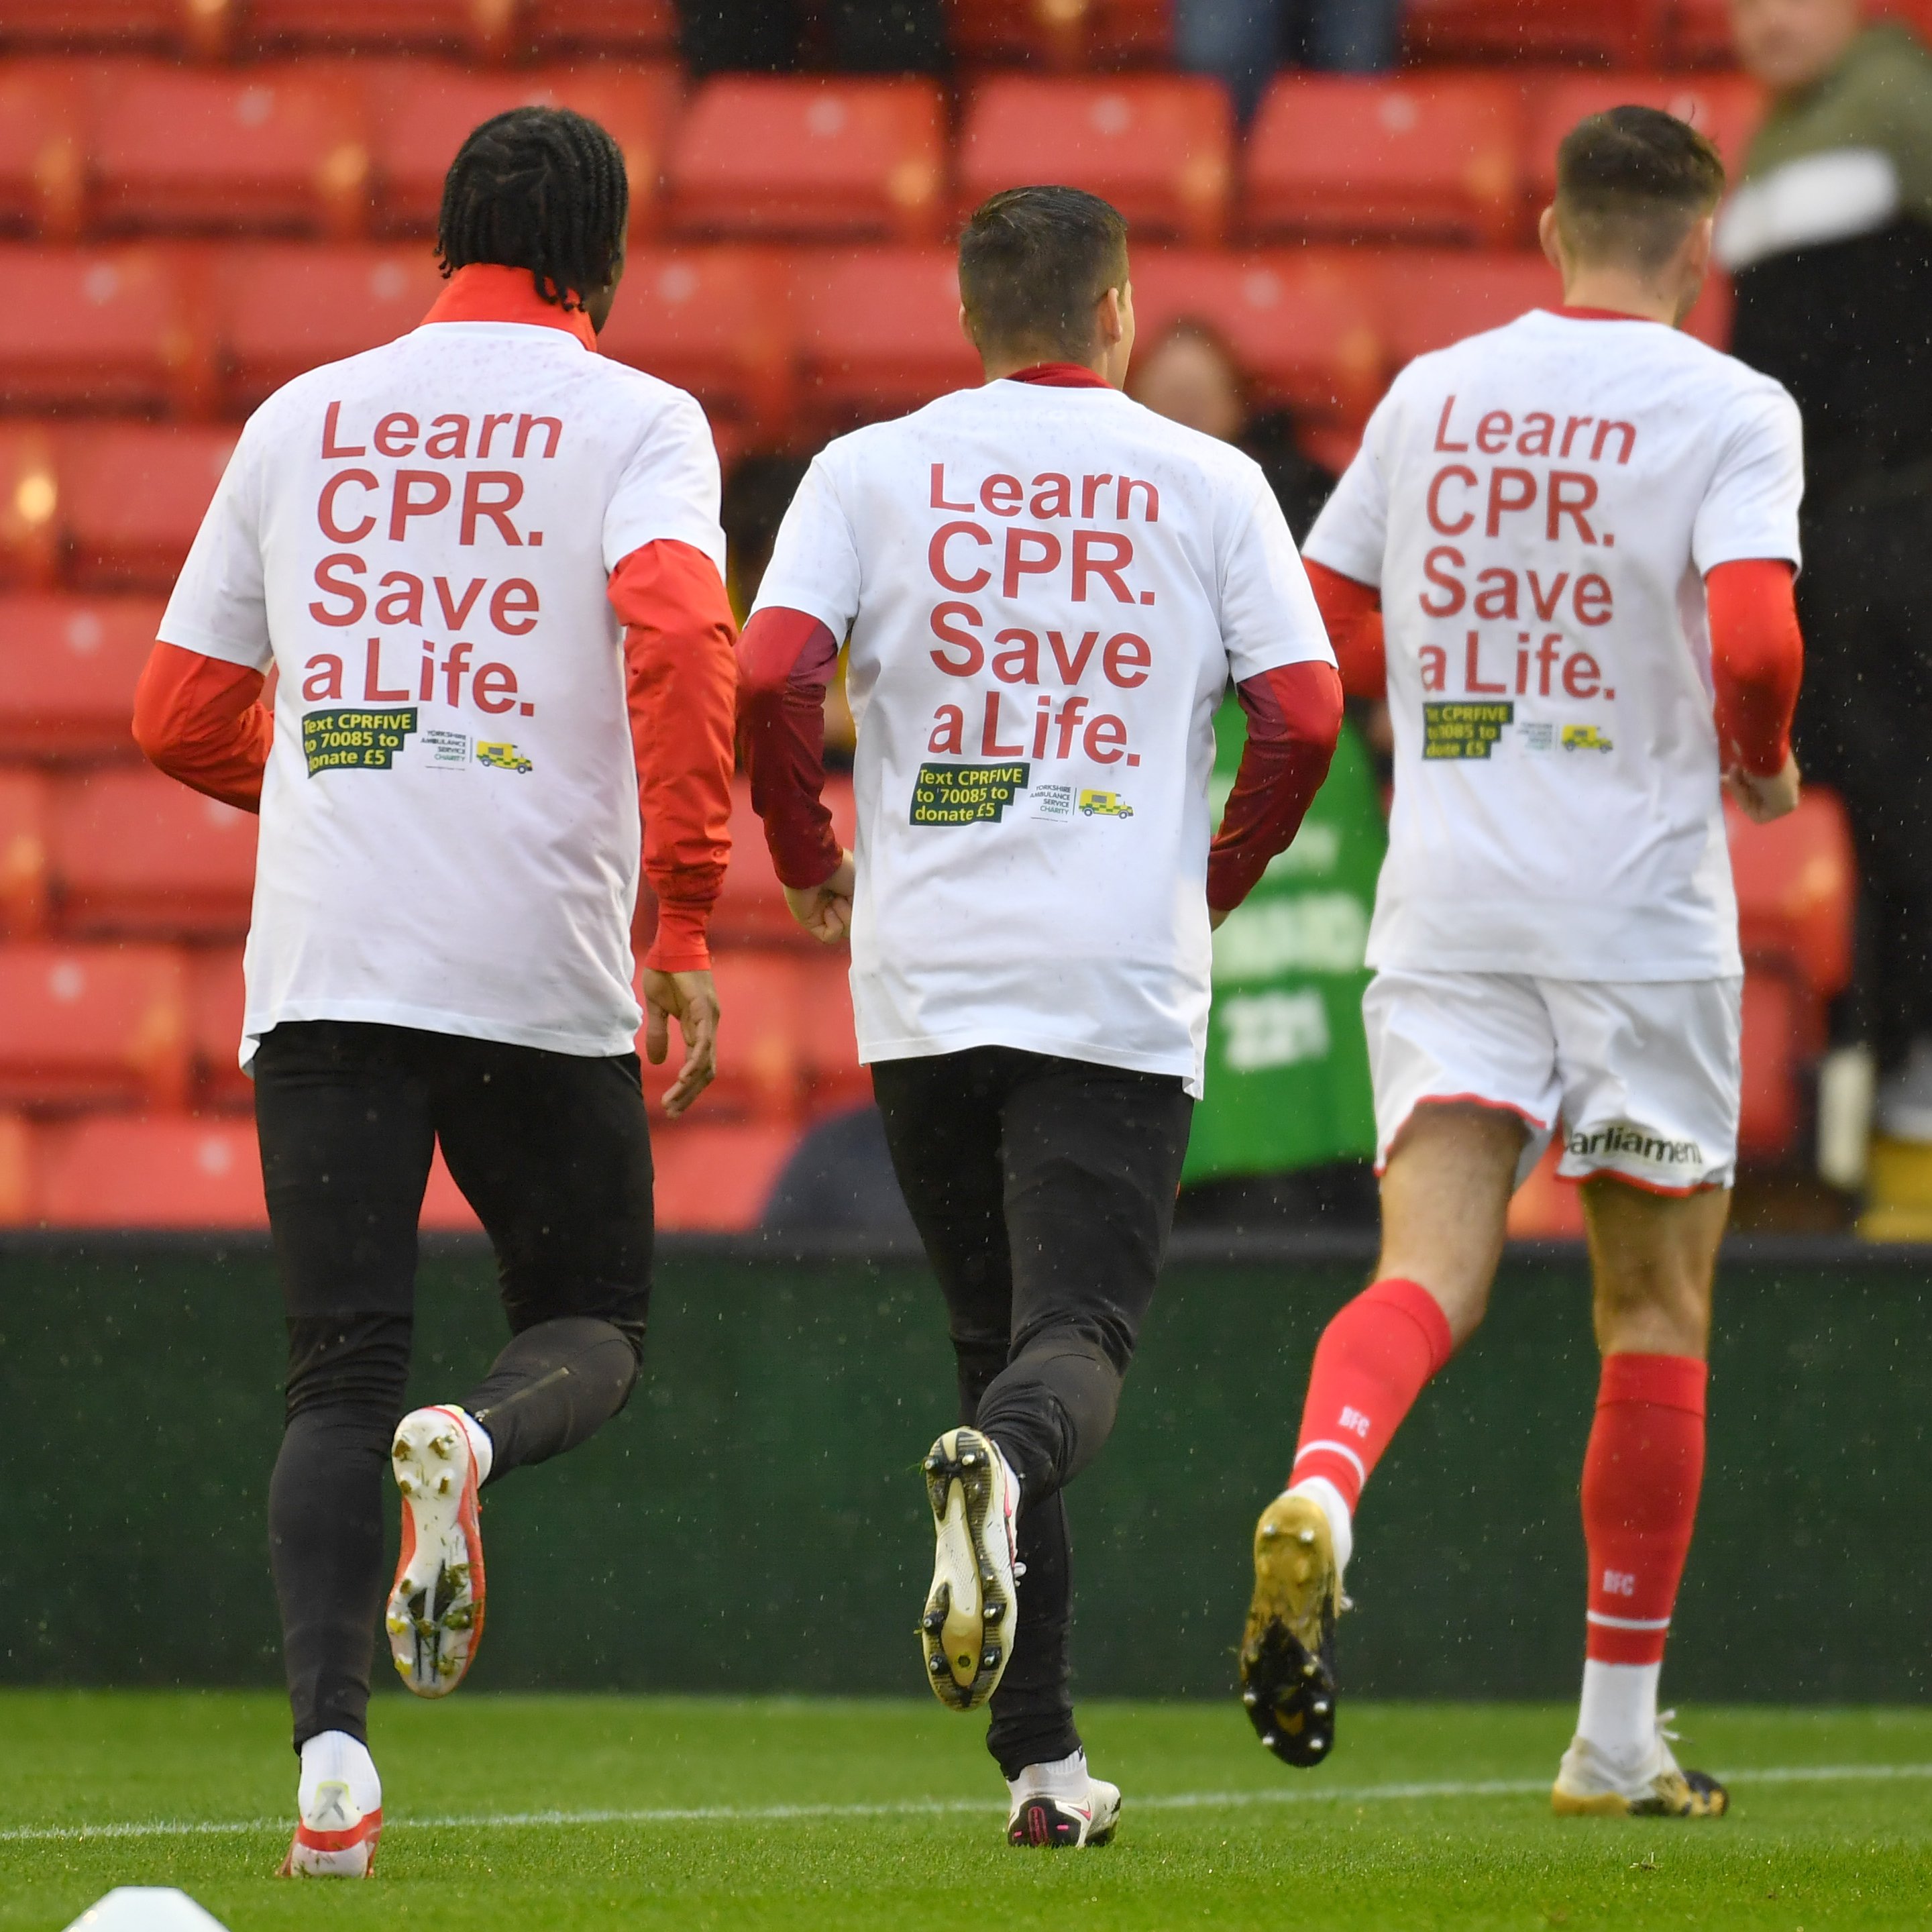 Barnsley FC players warming up wearing the Learn CPR. Save a Life t-shirts.